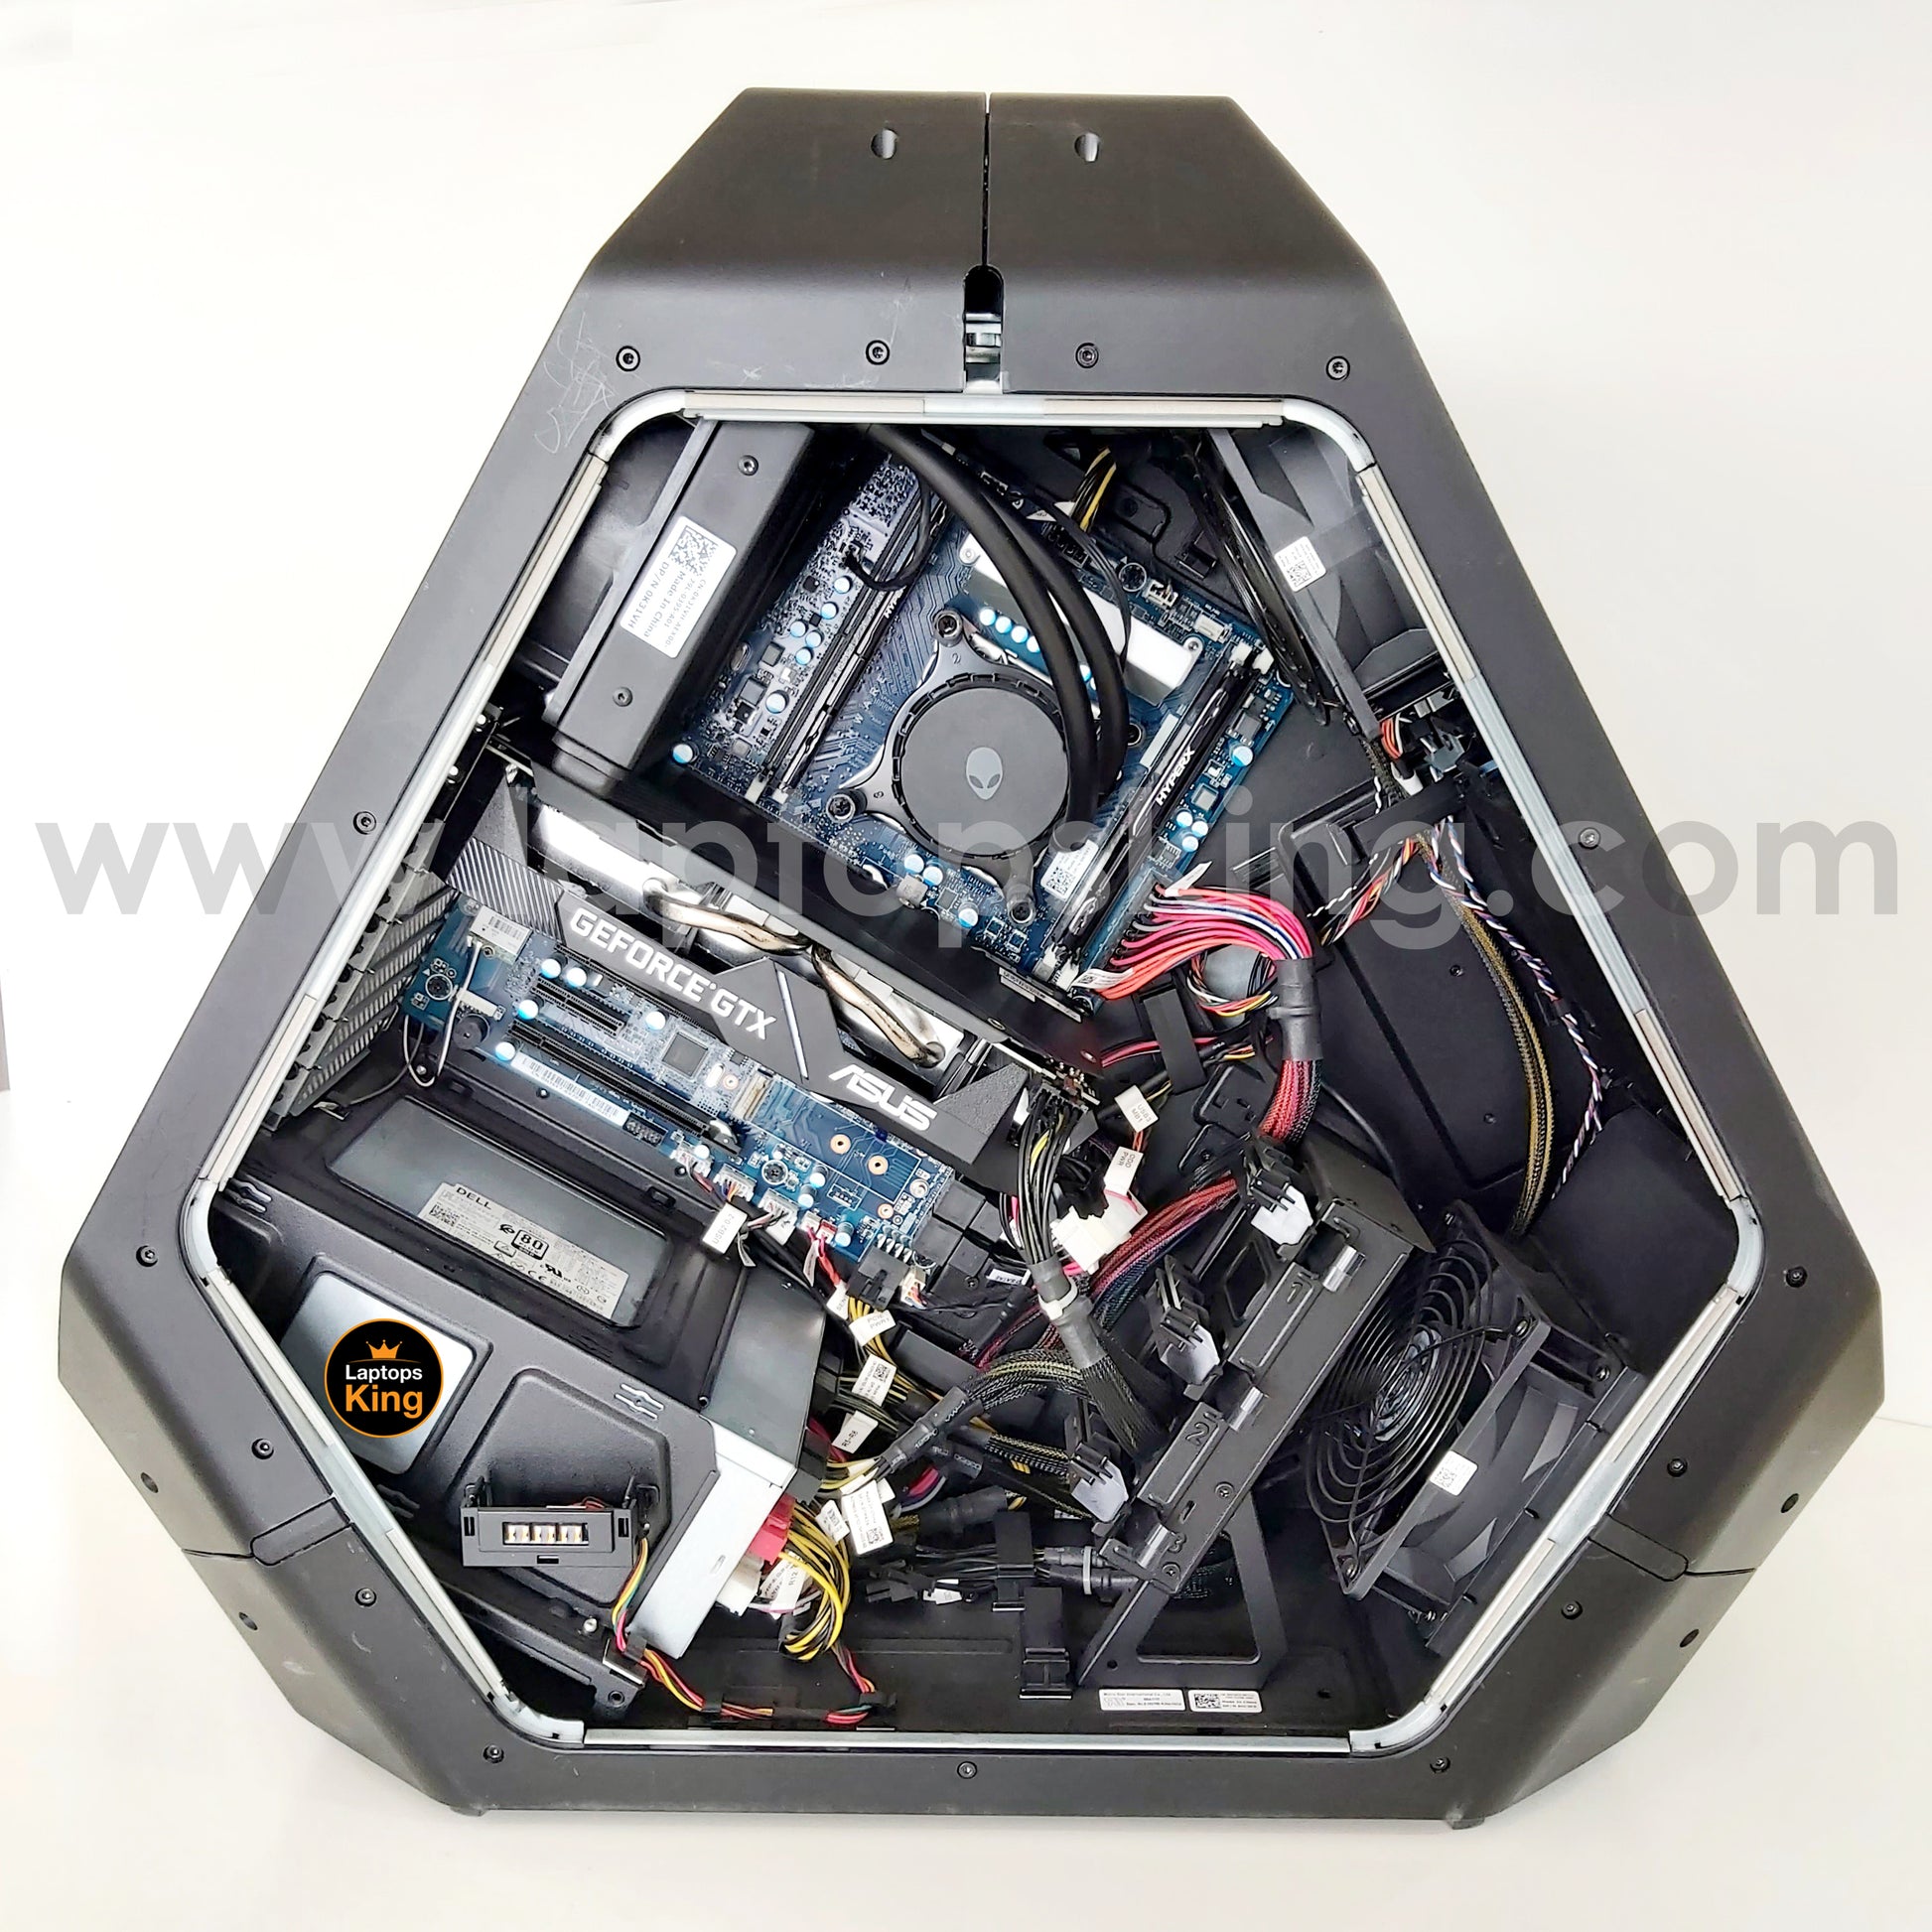 Alienware Area51 i7-7800x GTX 1660 Super - Gaming Desktop Computer (Used Just Like New) Gaming computer, Graphic Design computer, best computer for gaming, best computer for graphic design, computer for sale Lebanon, computer for video editing in Lebanon, computer for sale Lebanon, best graphic design computer, best video editing computer, best programming computer, computer for sale in Lebanon, computer for sale in Lebanon, computer for sale in Lebanon, buy computer Lebanon, buy laptop Lebanon.